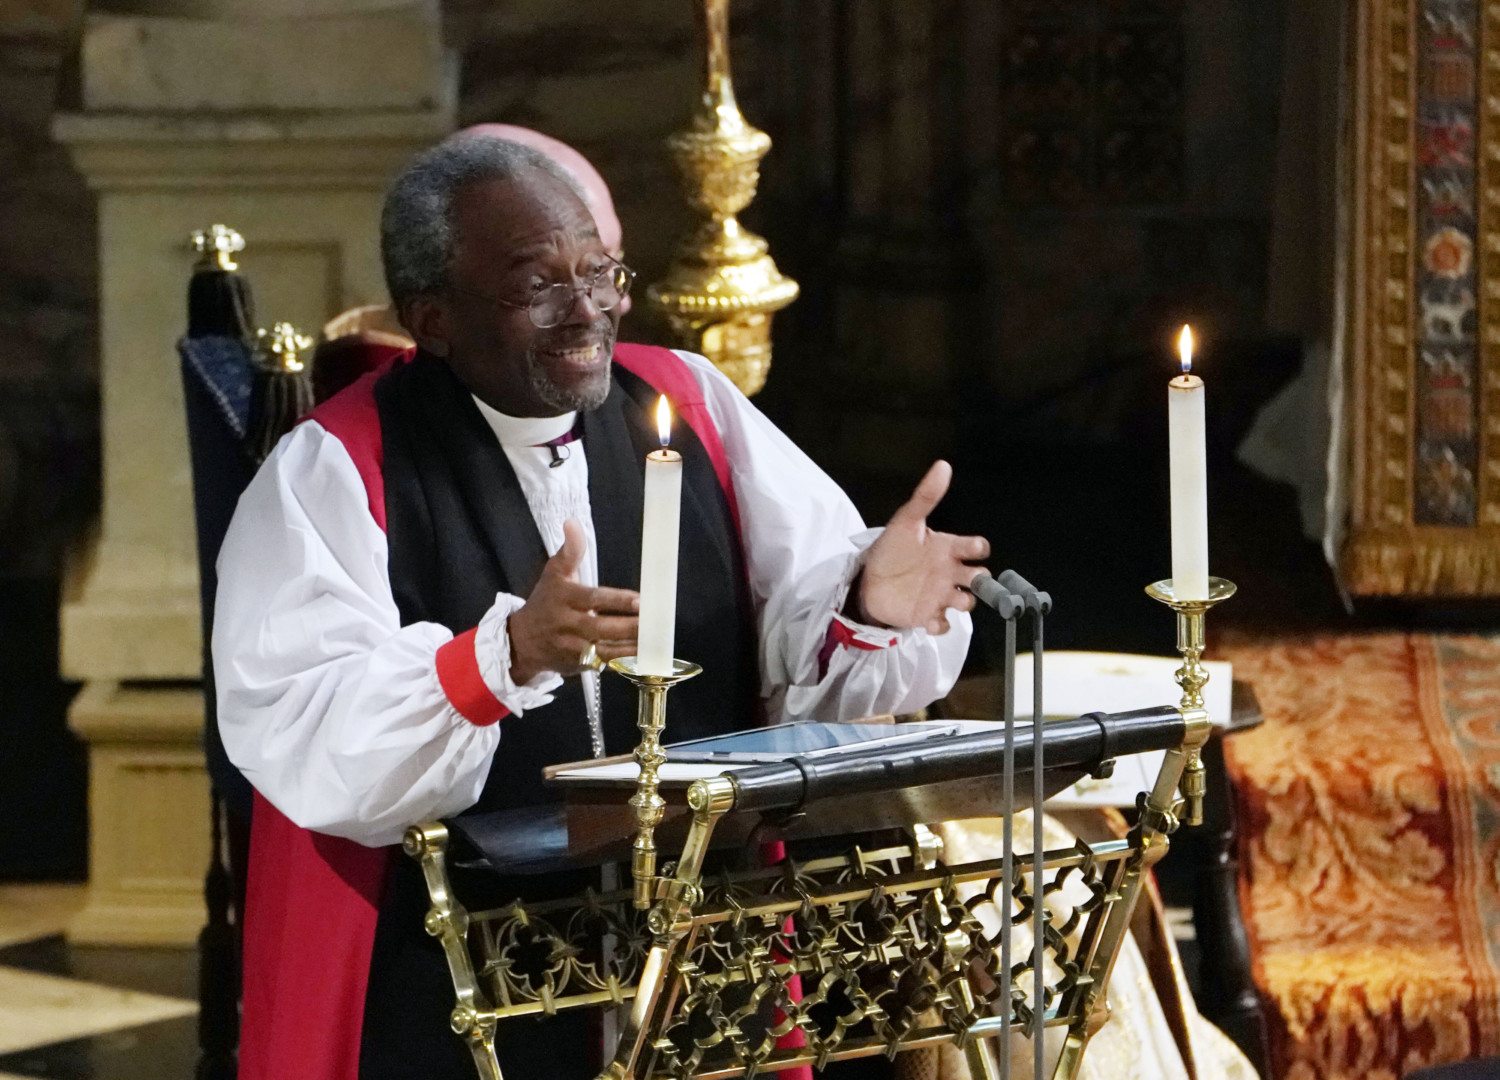 bishop michael bruce curry photo